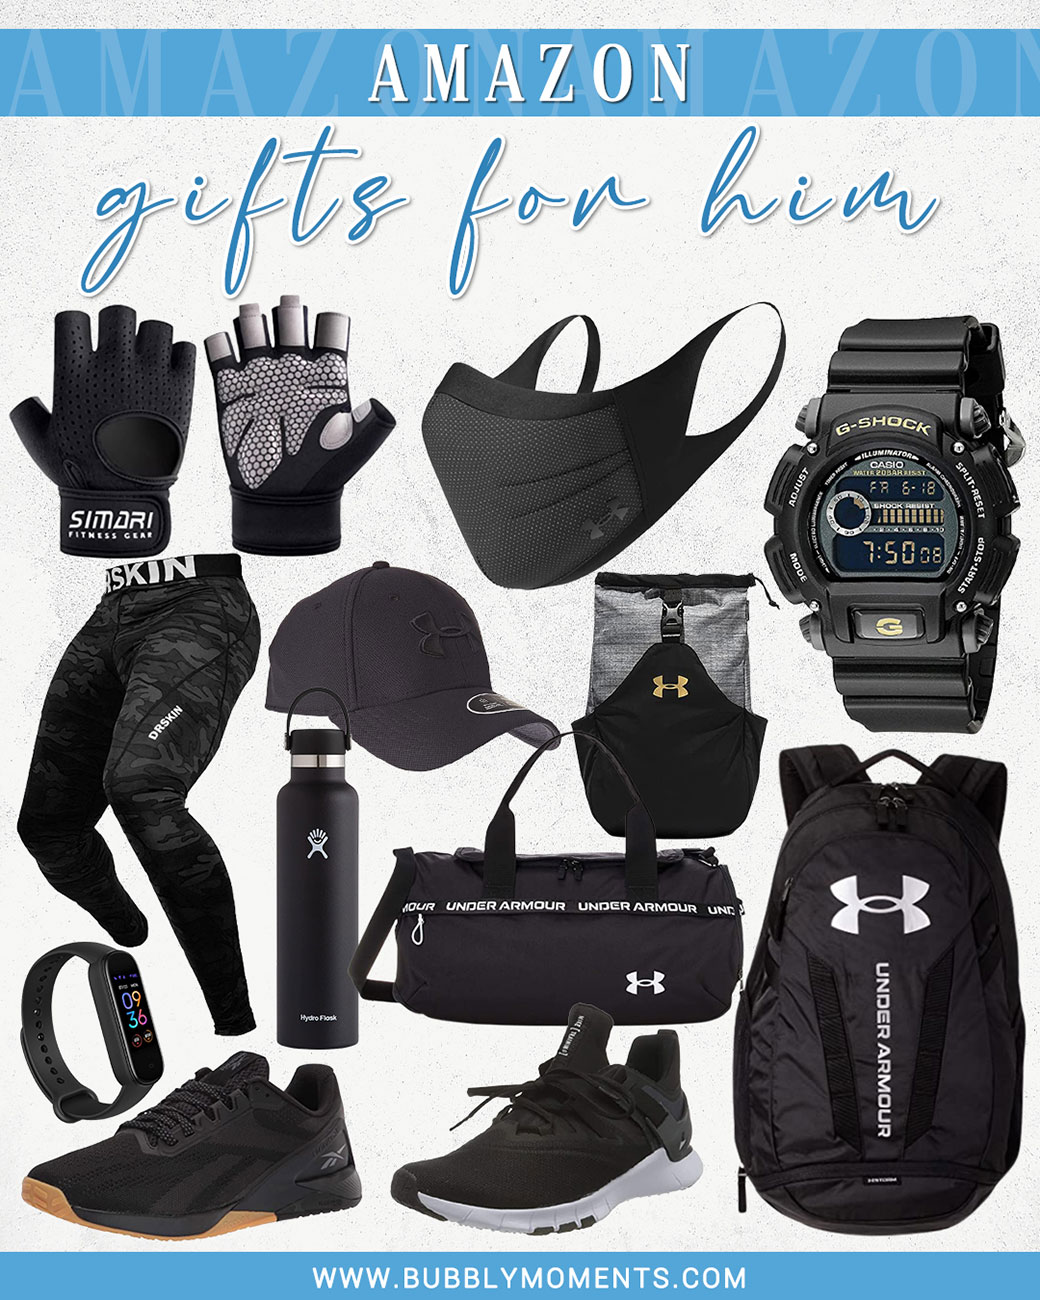 Holiday gift | christmas gifts | unisex gift ideas | face masks | christmas gift ideas | holiday gift guides | fashion gift ideas | electronics | inulated water bottle | gym bag | gym shoes | water bottle | under armour | Bubbly Moments